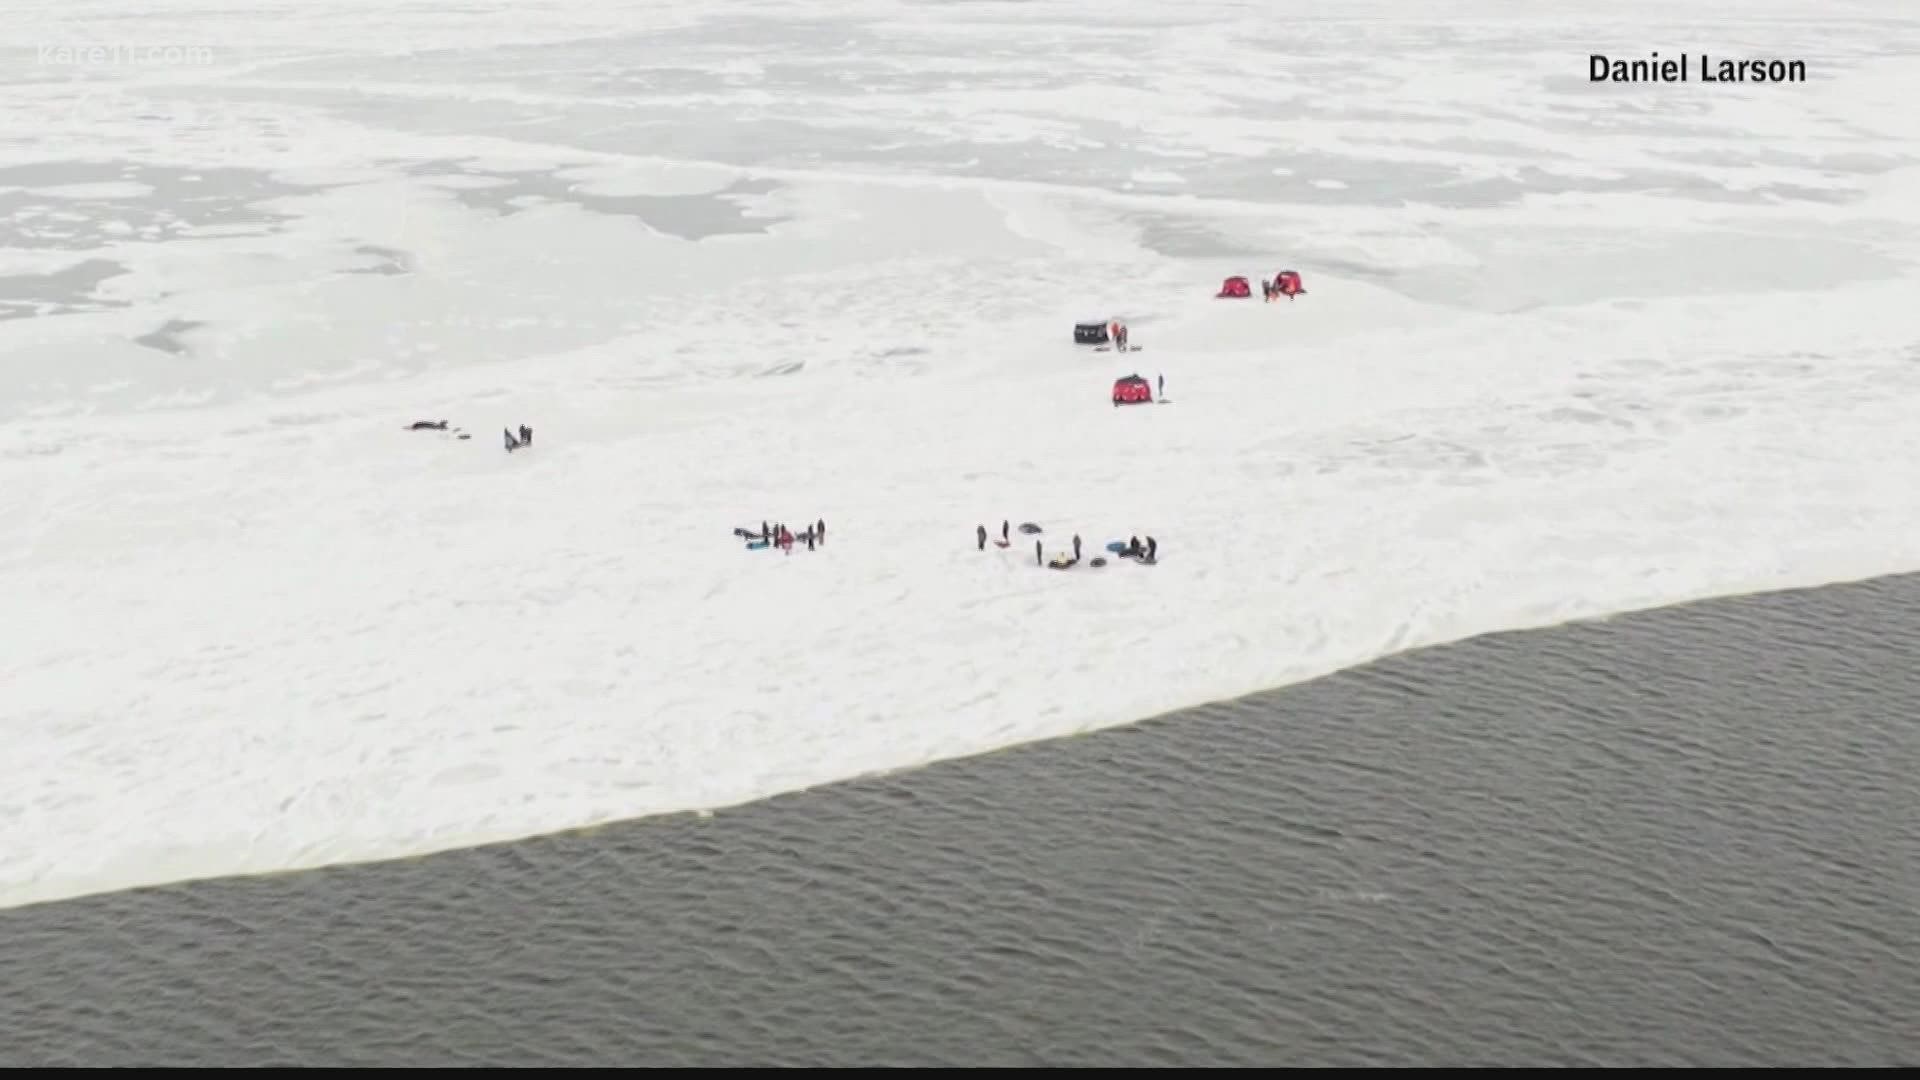 The Brown County Sheriff said everyone should stay off the ice along the east shore of the bay.